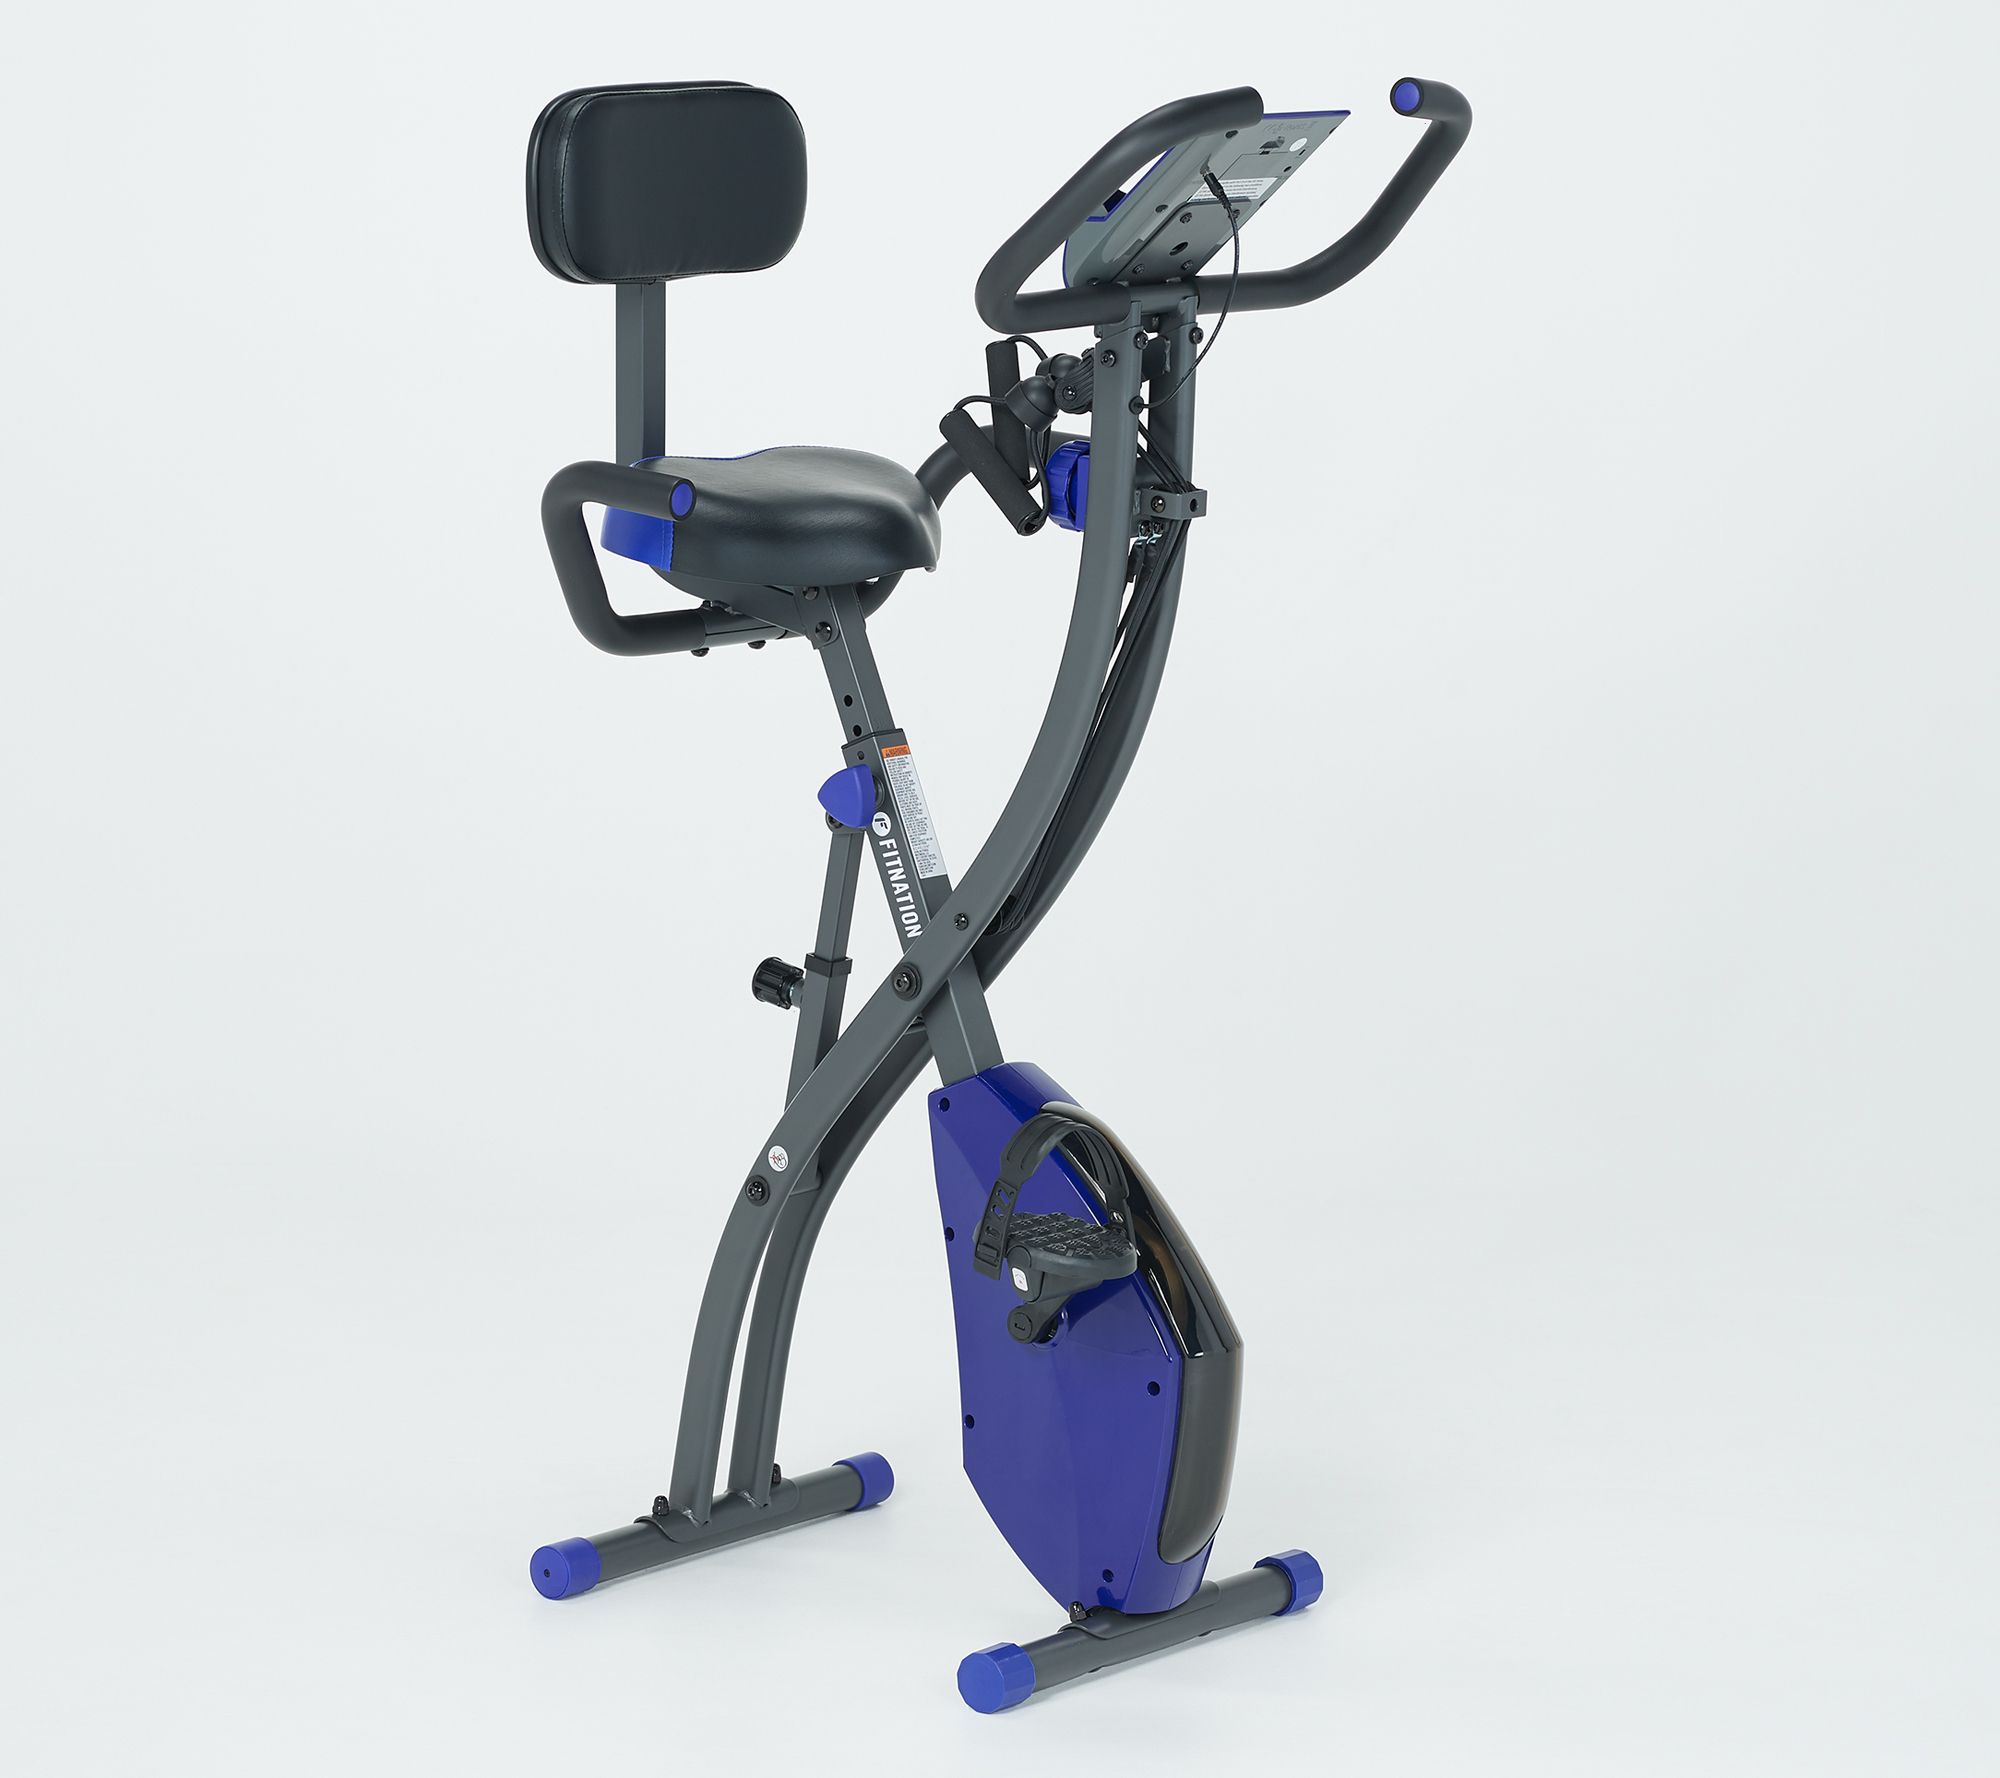 fit quest exercise bike